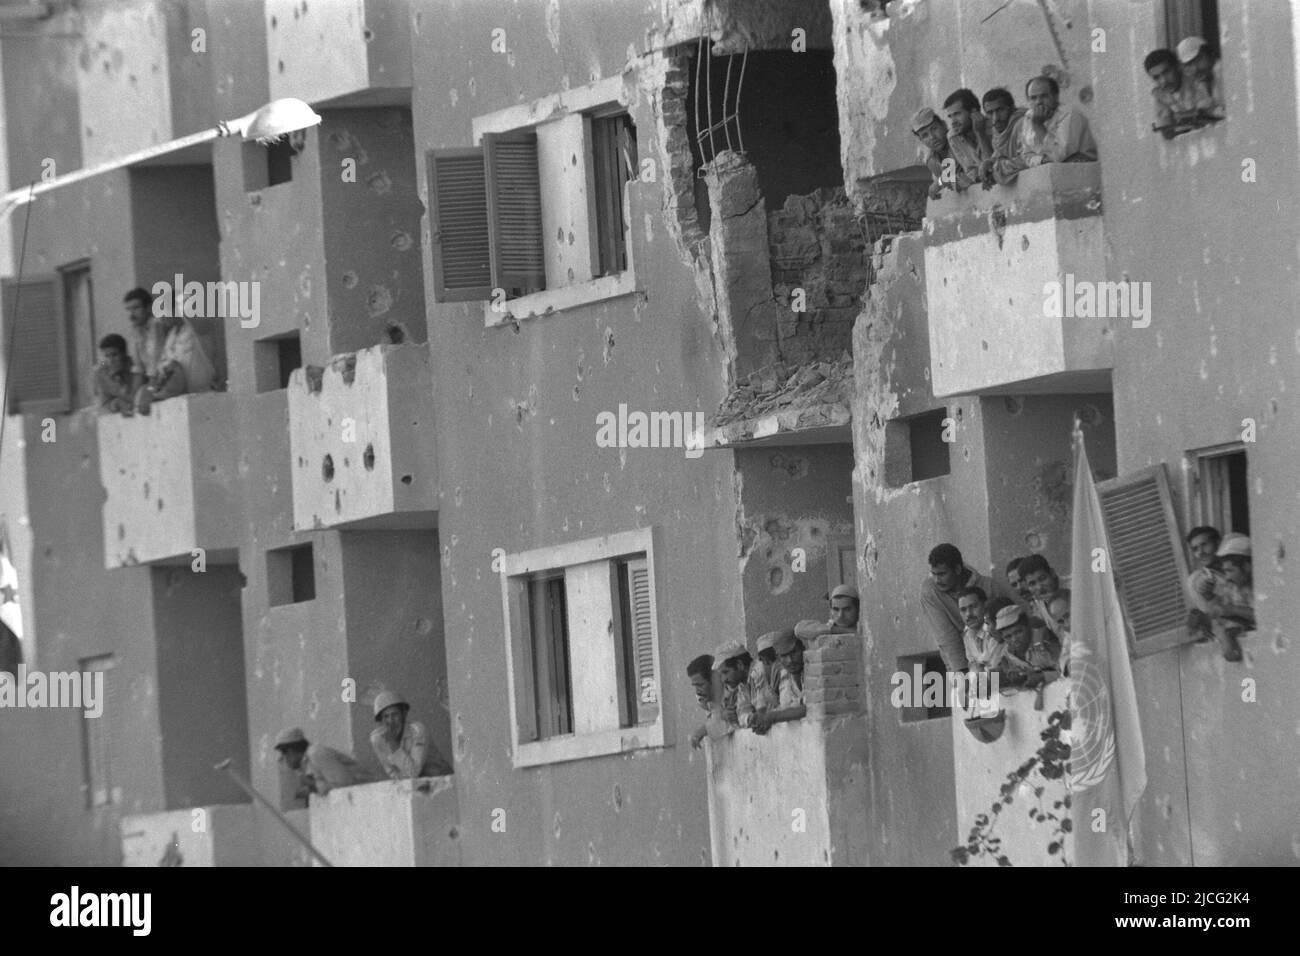 Egyptian soldiers looking out of windows, buildings on the outskirts of Suez, bullet holes can be seen in the wall of the house, during the Yom Kippur War, the Yom Kippur War between Israel and the Arab states of Egypt, Jordan and Syria lasted from April 6 to October to October 25, 1973, Stock Photo